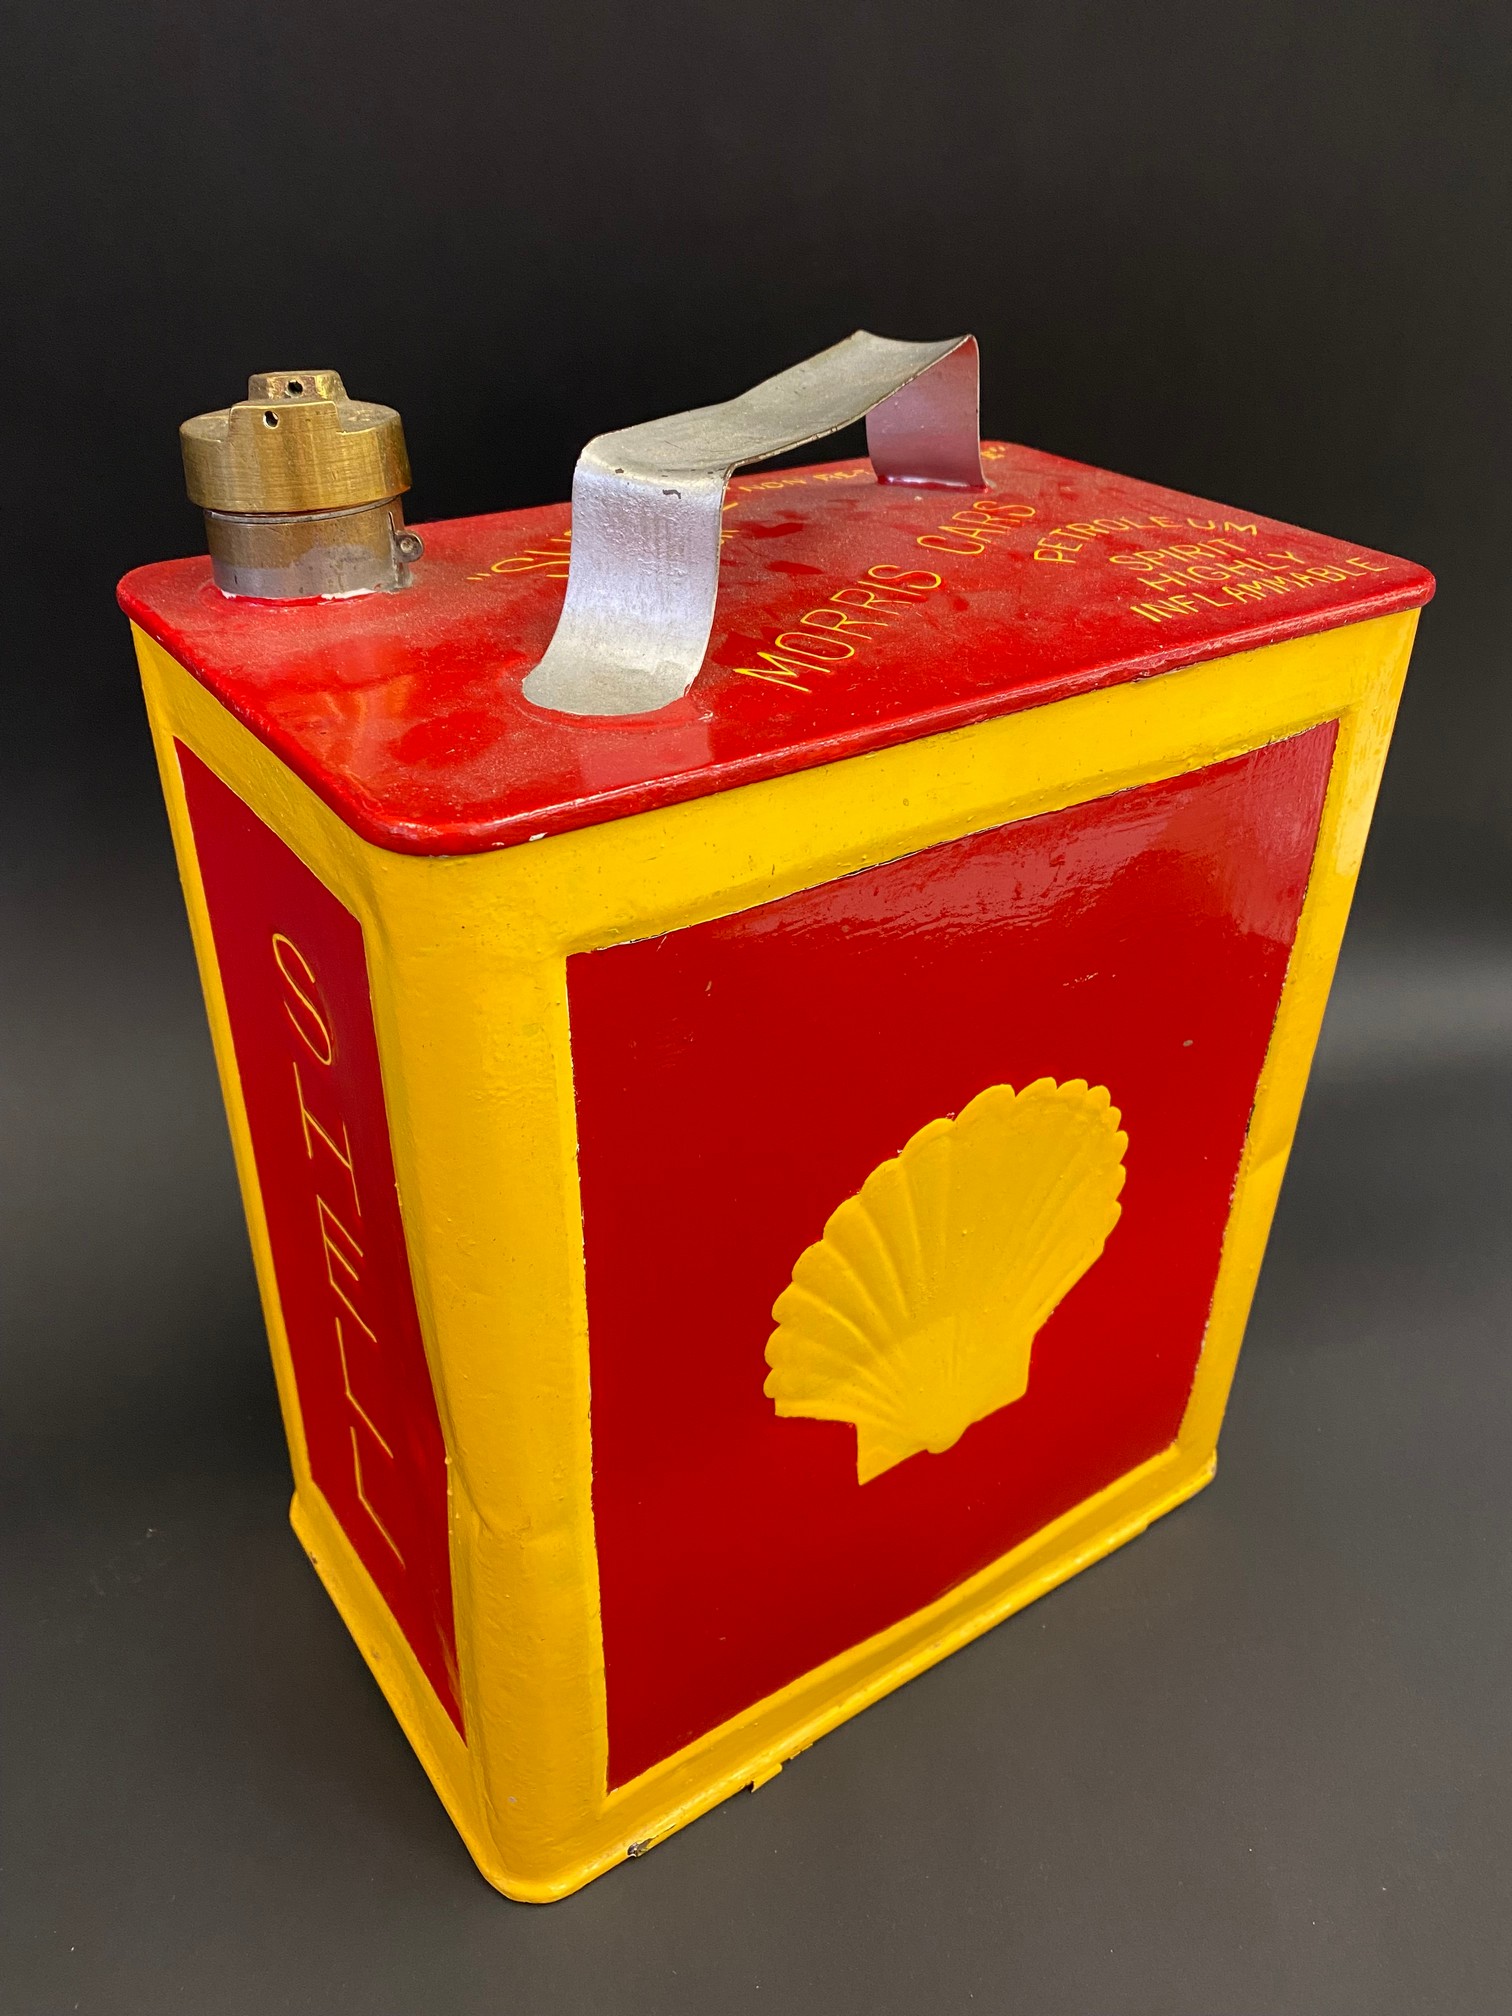 A Shell for Morris Cars two gallon petrol can with Shell brass cap.